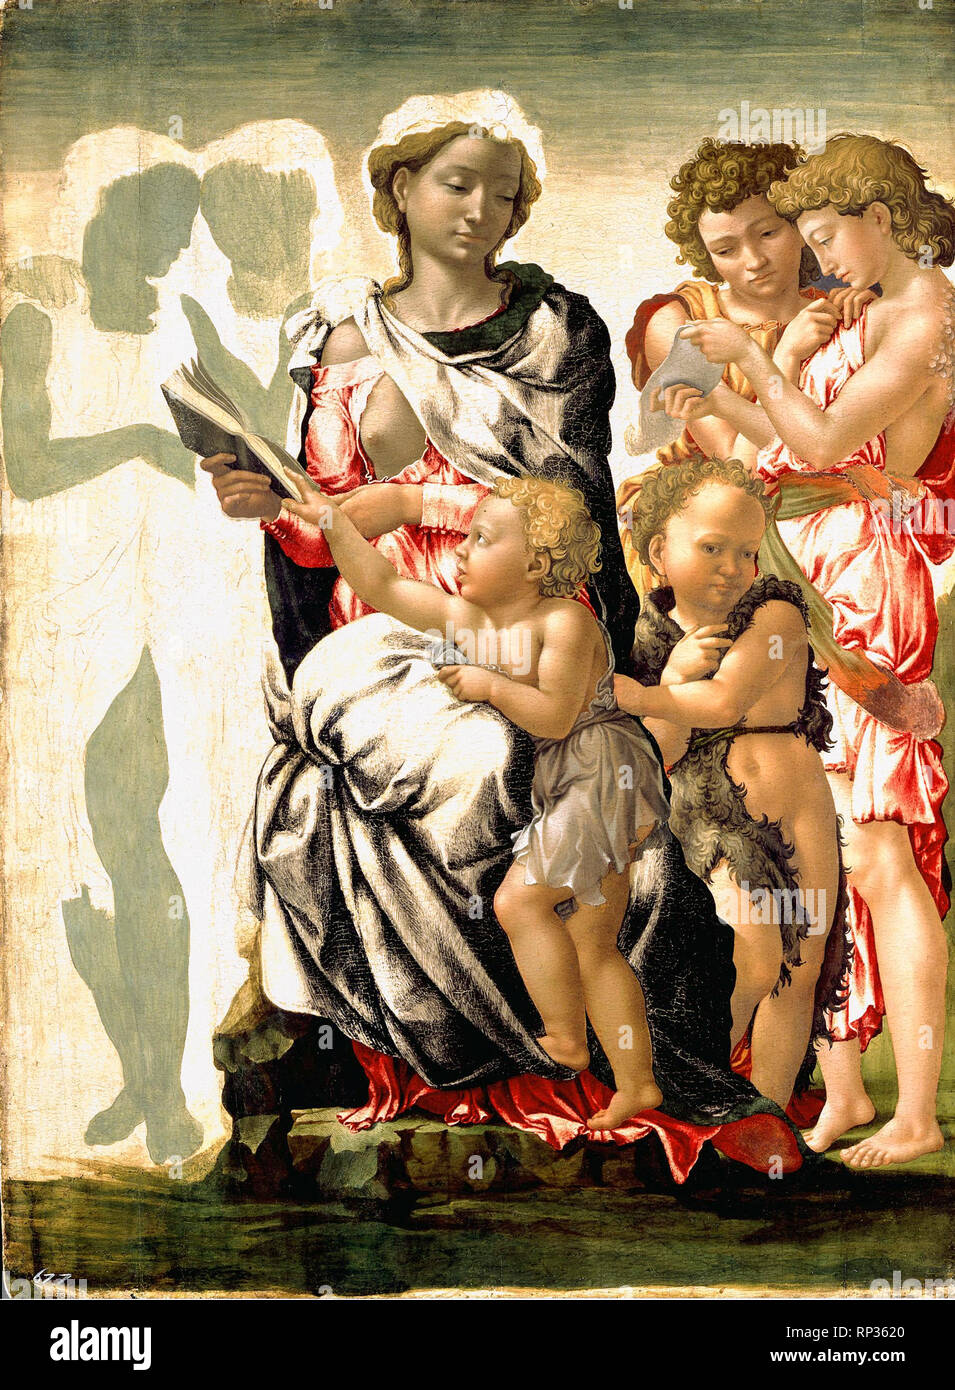 The Manchester Madonna, Michelangelo, c. 1497, unfinished painting Stock Photo